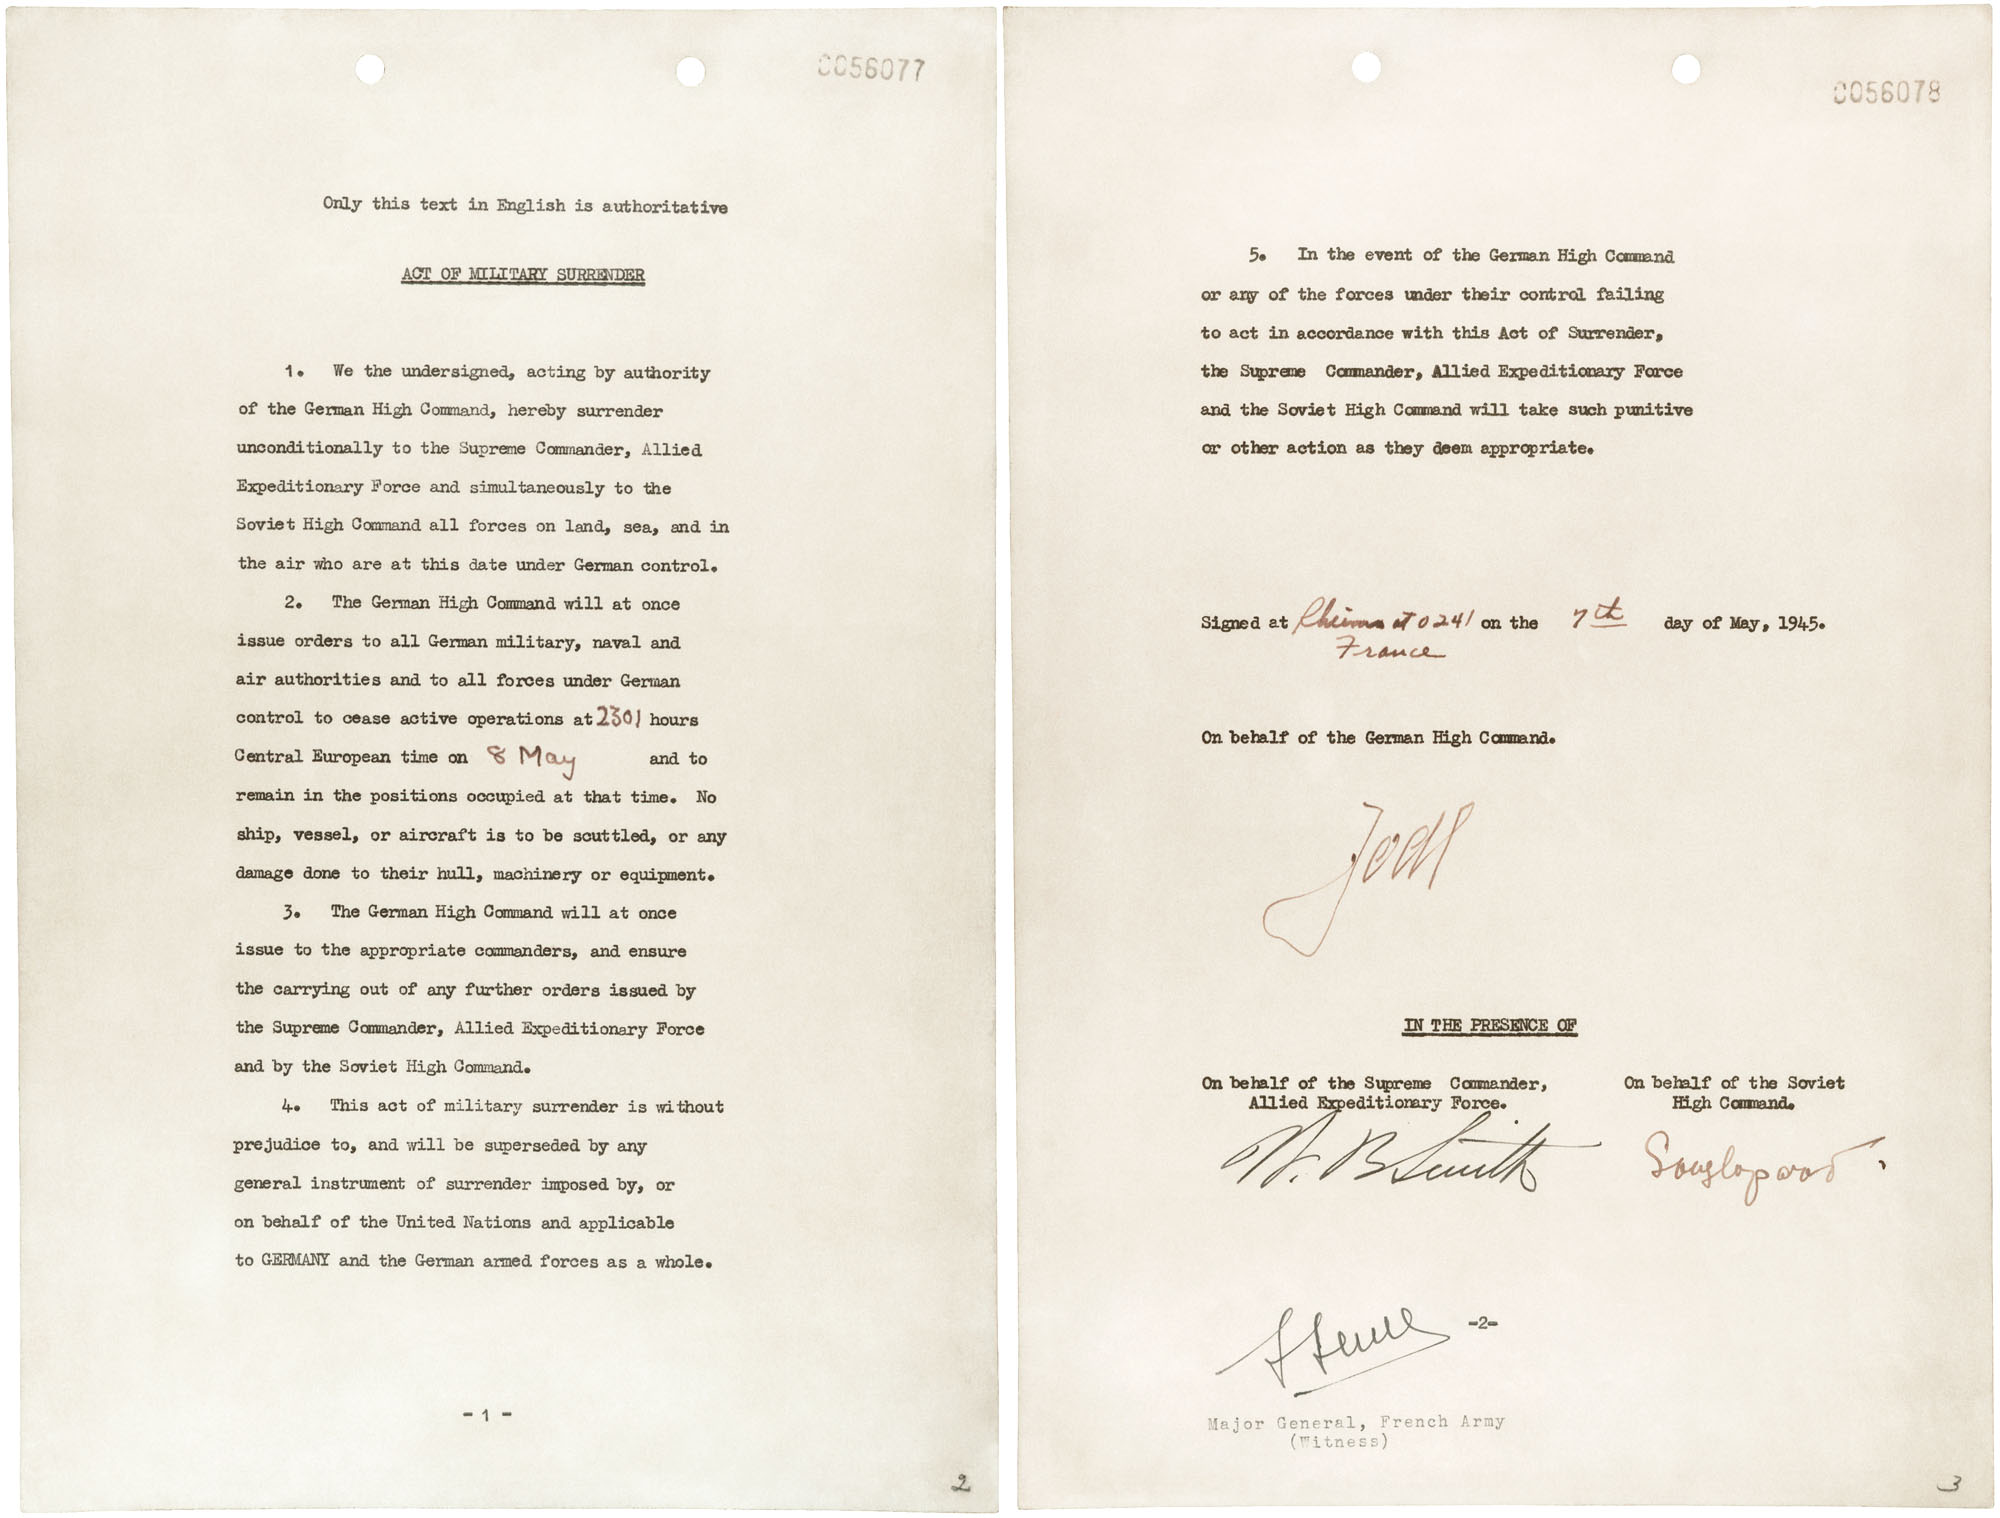 The instrument of surrender, signed May 7, 1945